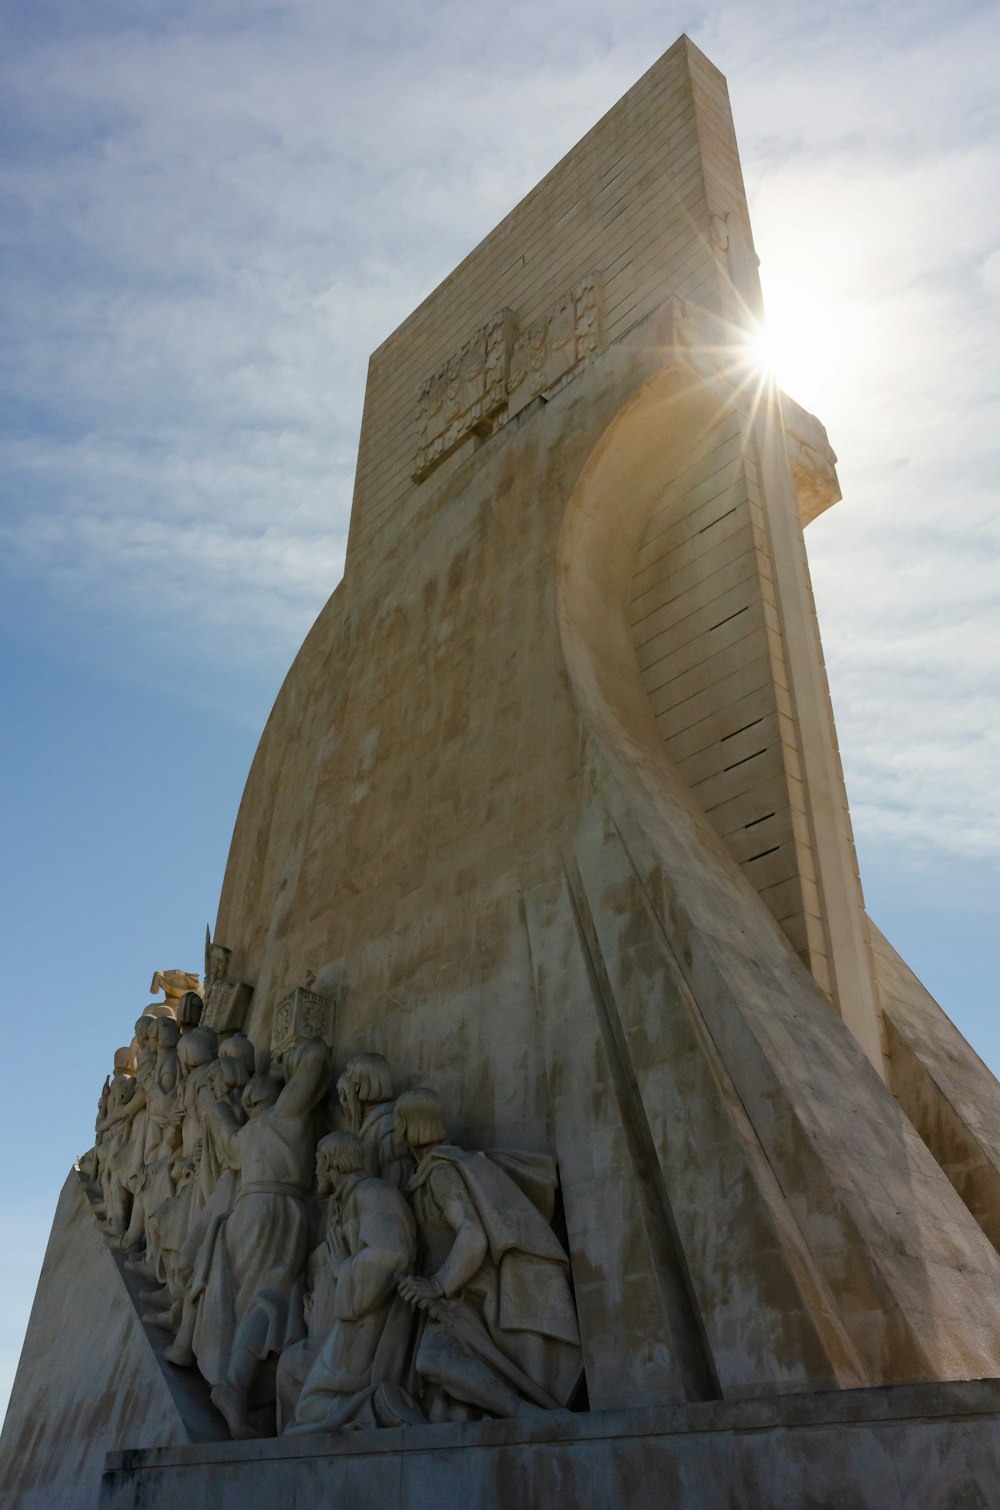 the sun shines brightly behind a monument